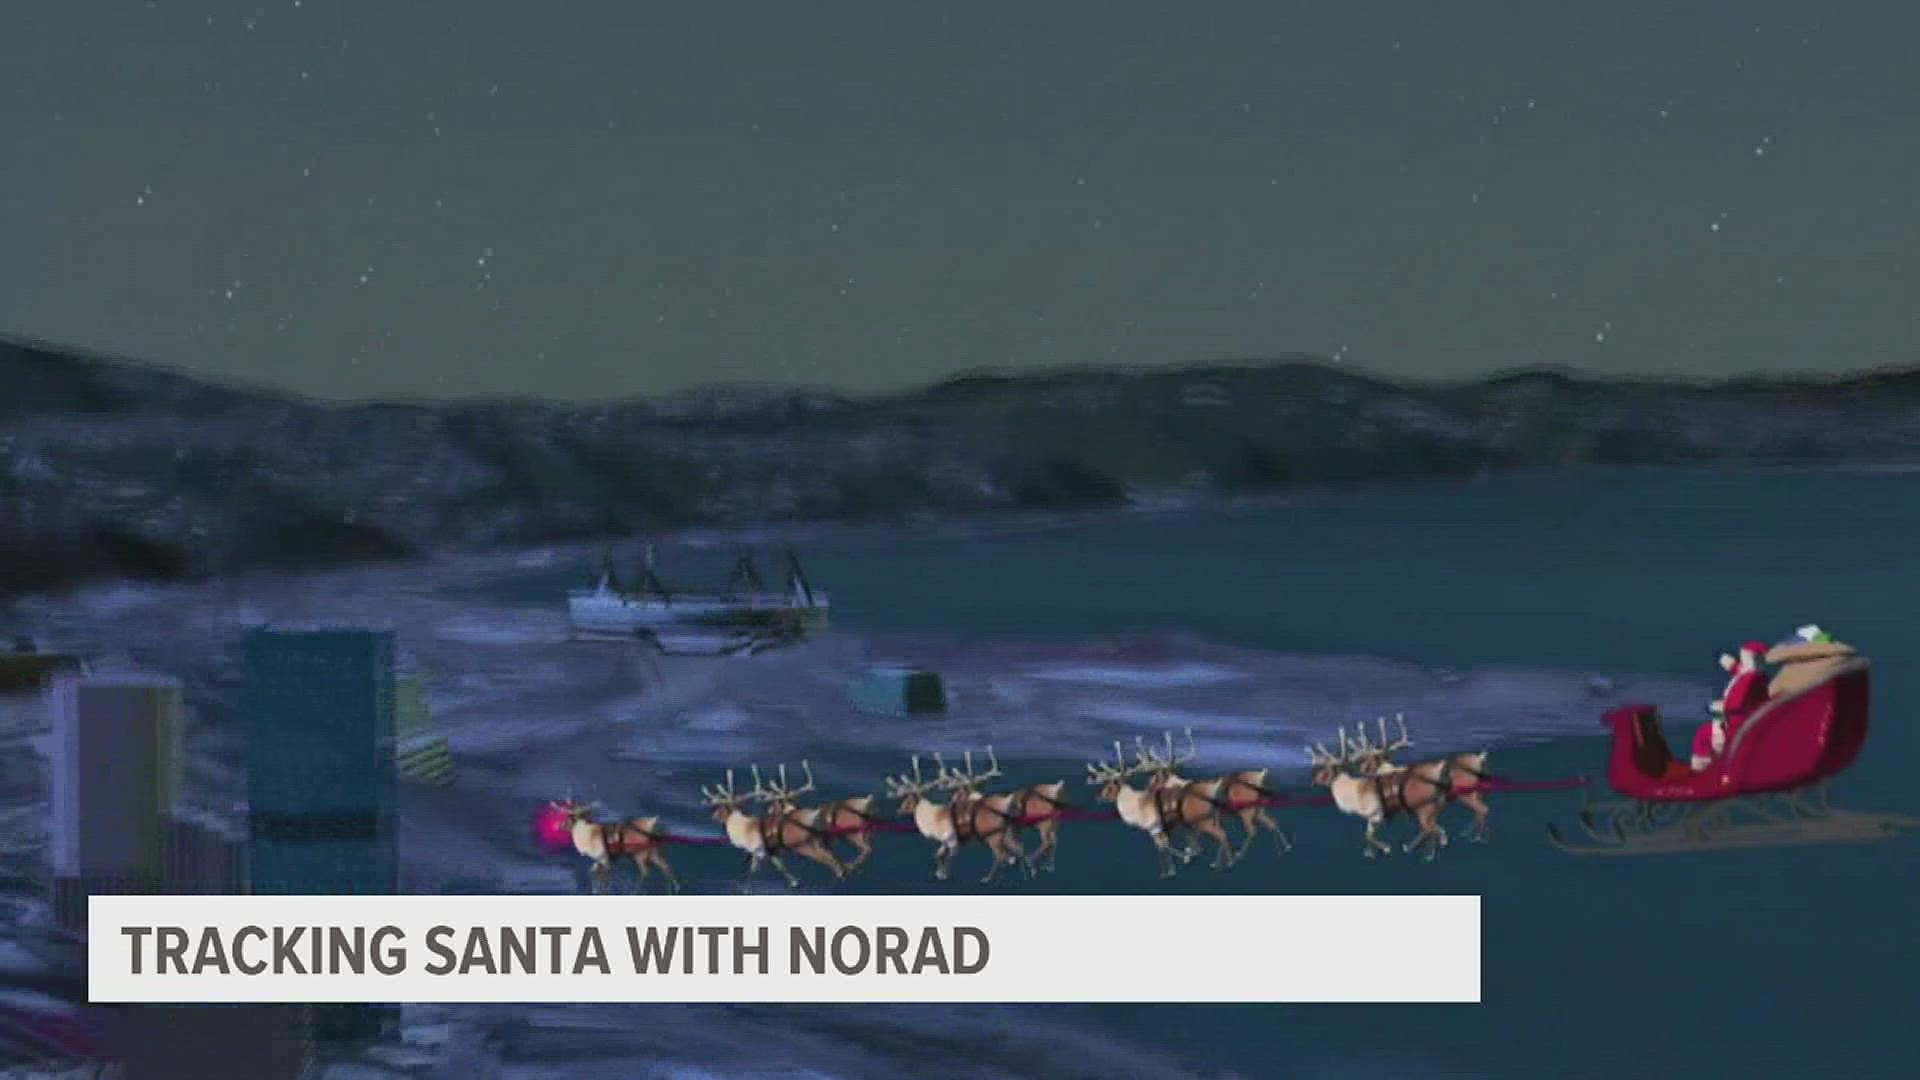 Ever wonder how NORAD keeps track of Santa on the big night? We have the answers!